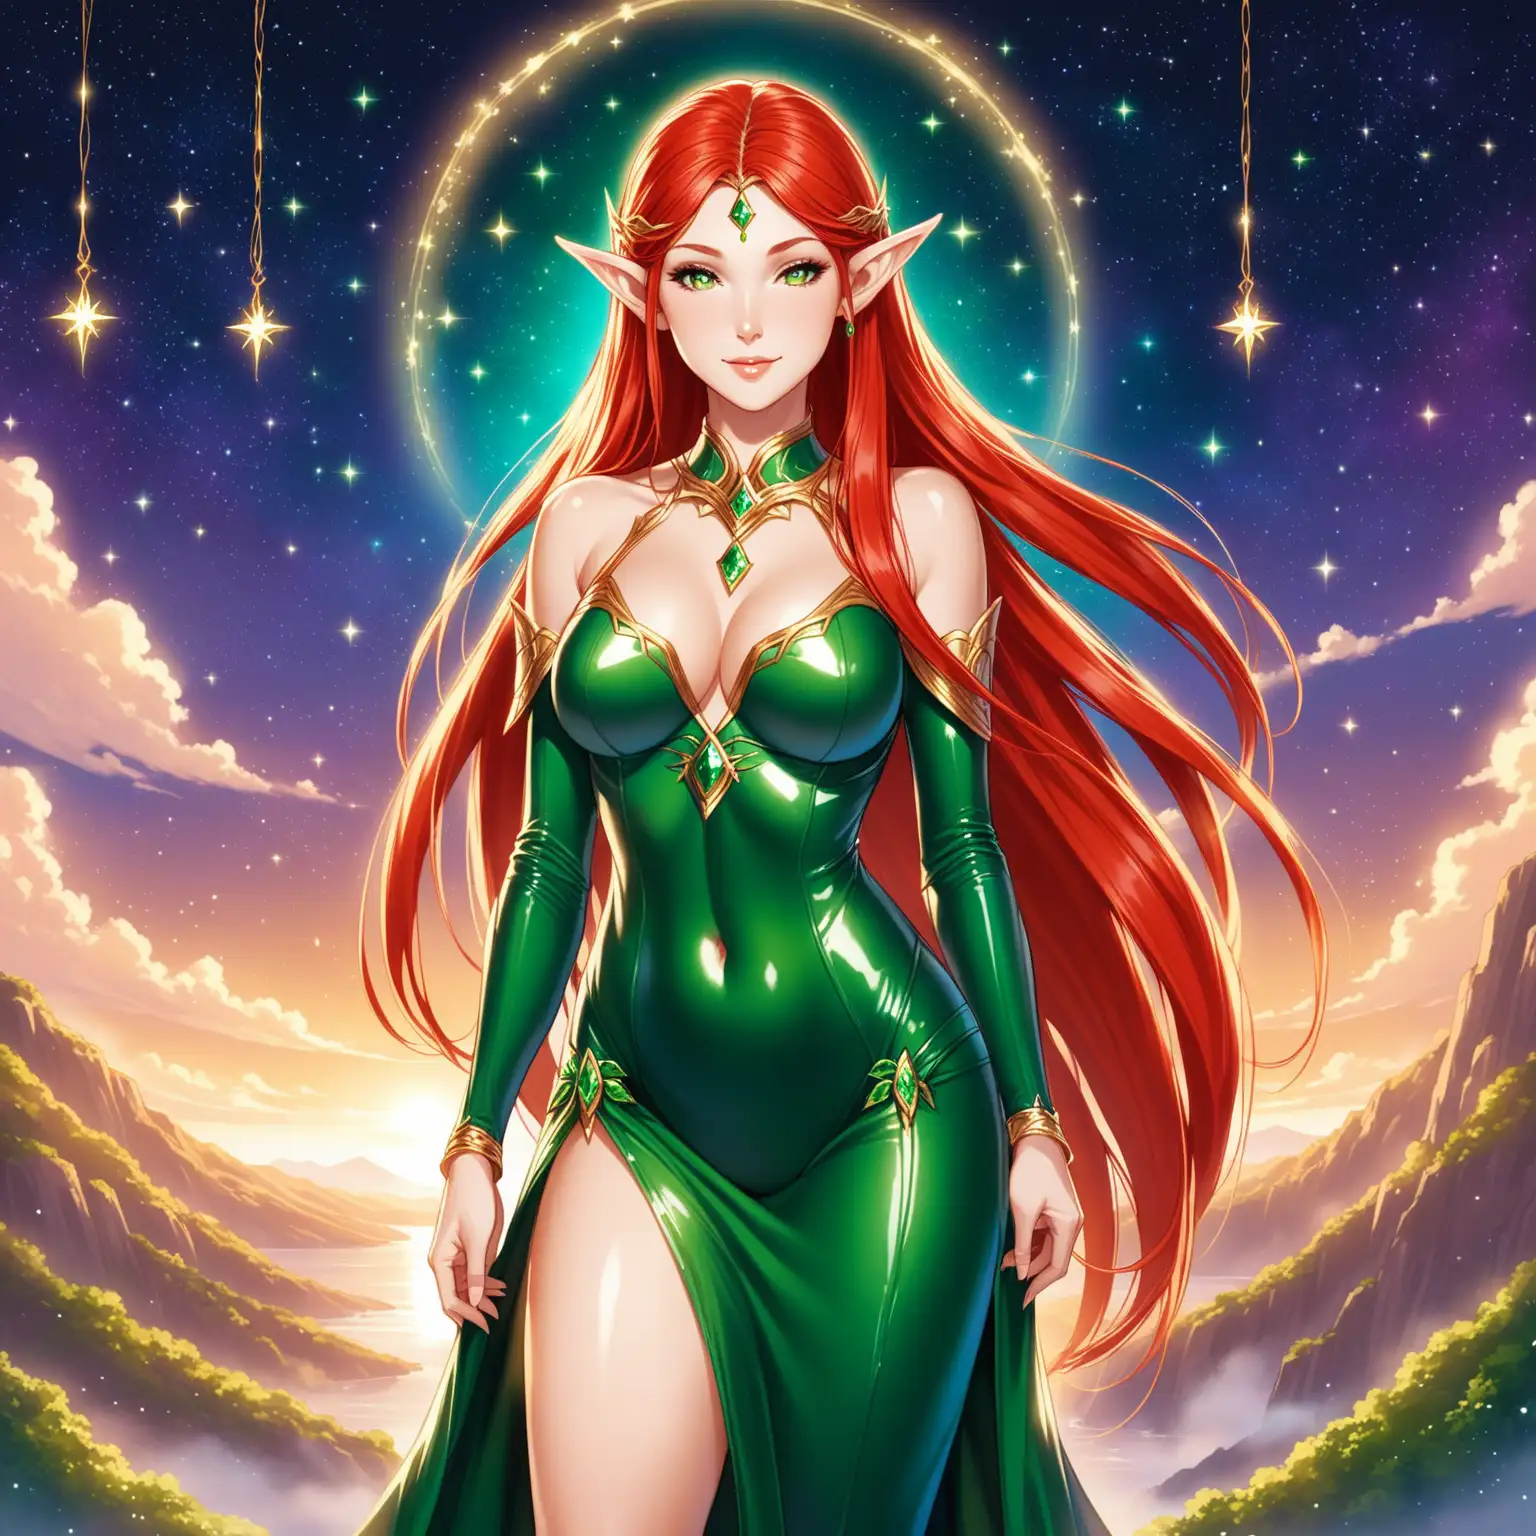 1 elf woman. She is the goddess of the elves. She is extremely beautiful and mature. She is 50 years old. She has very long straight red hair. She is elegant and regal. She has medium tits and is physically fit. She is wearing a hunter green long latex dress and high heels. She is wearing gold Jewelry with emeralds. She has a soft smile. She does not look young. She is in the elven heaven with stars and magic in the background.